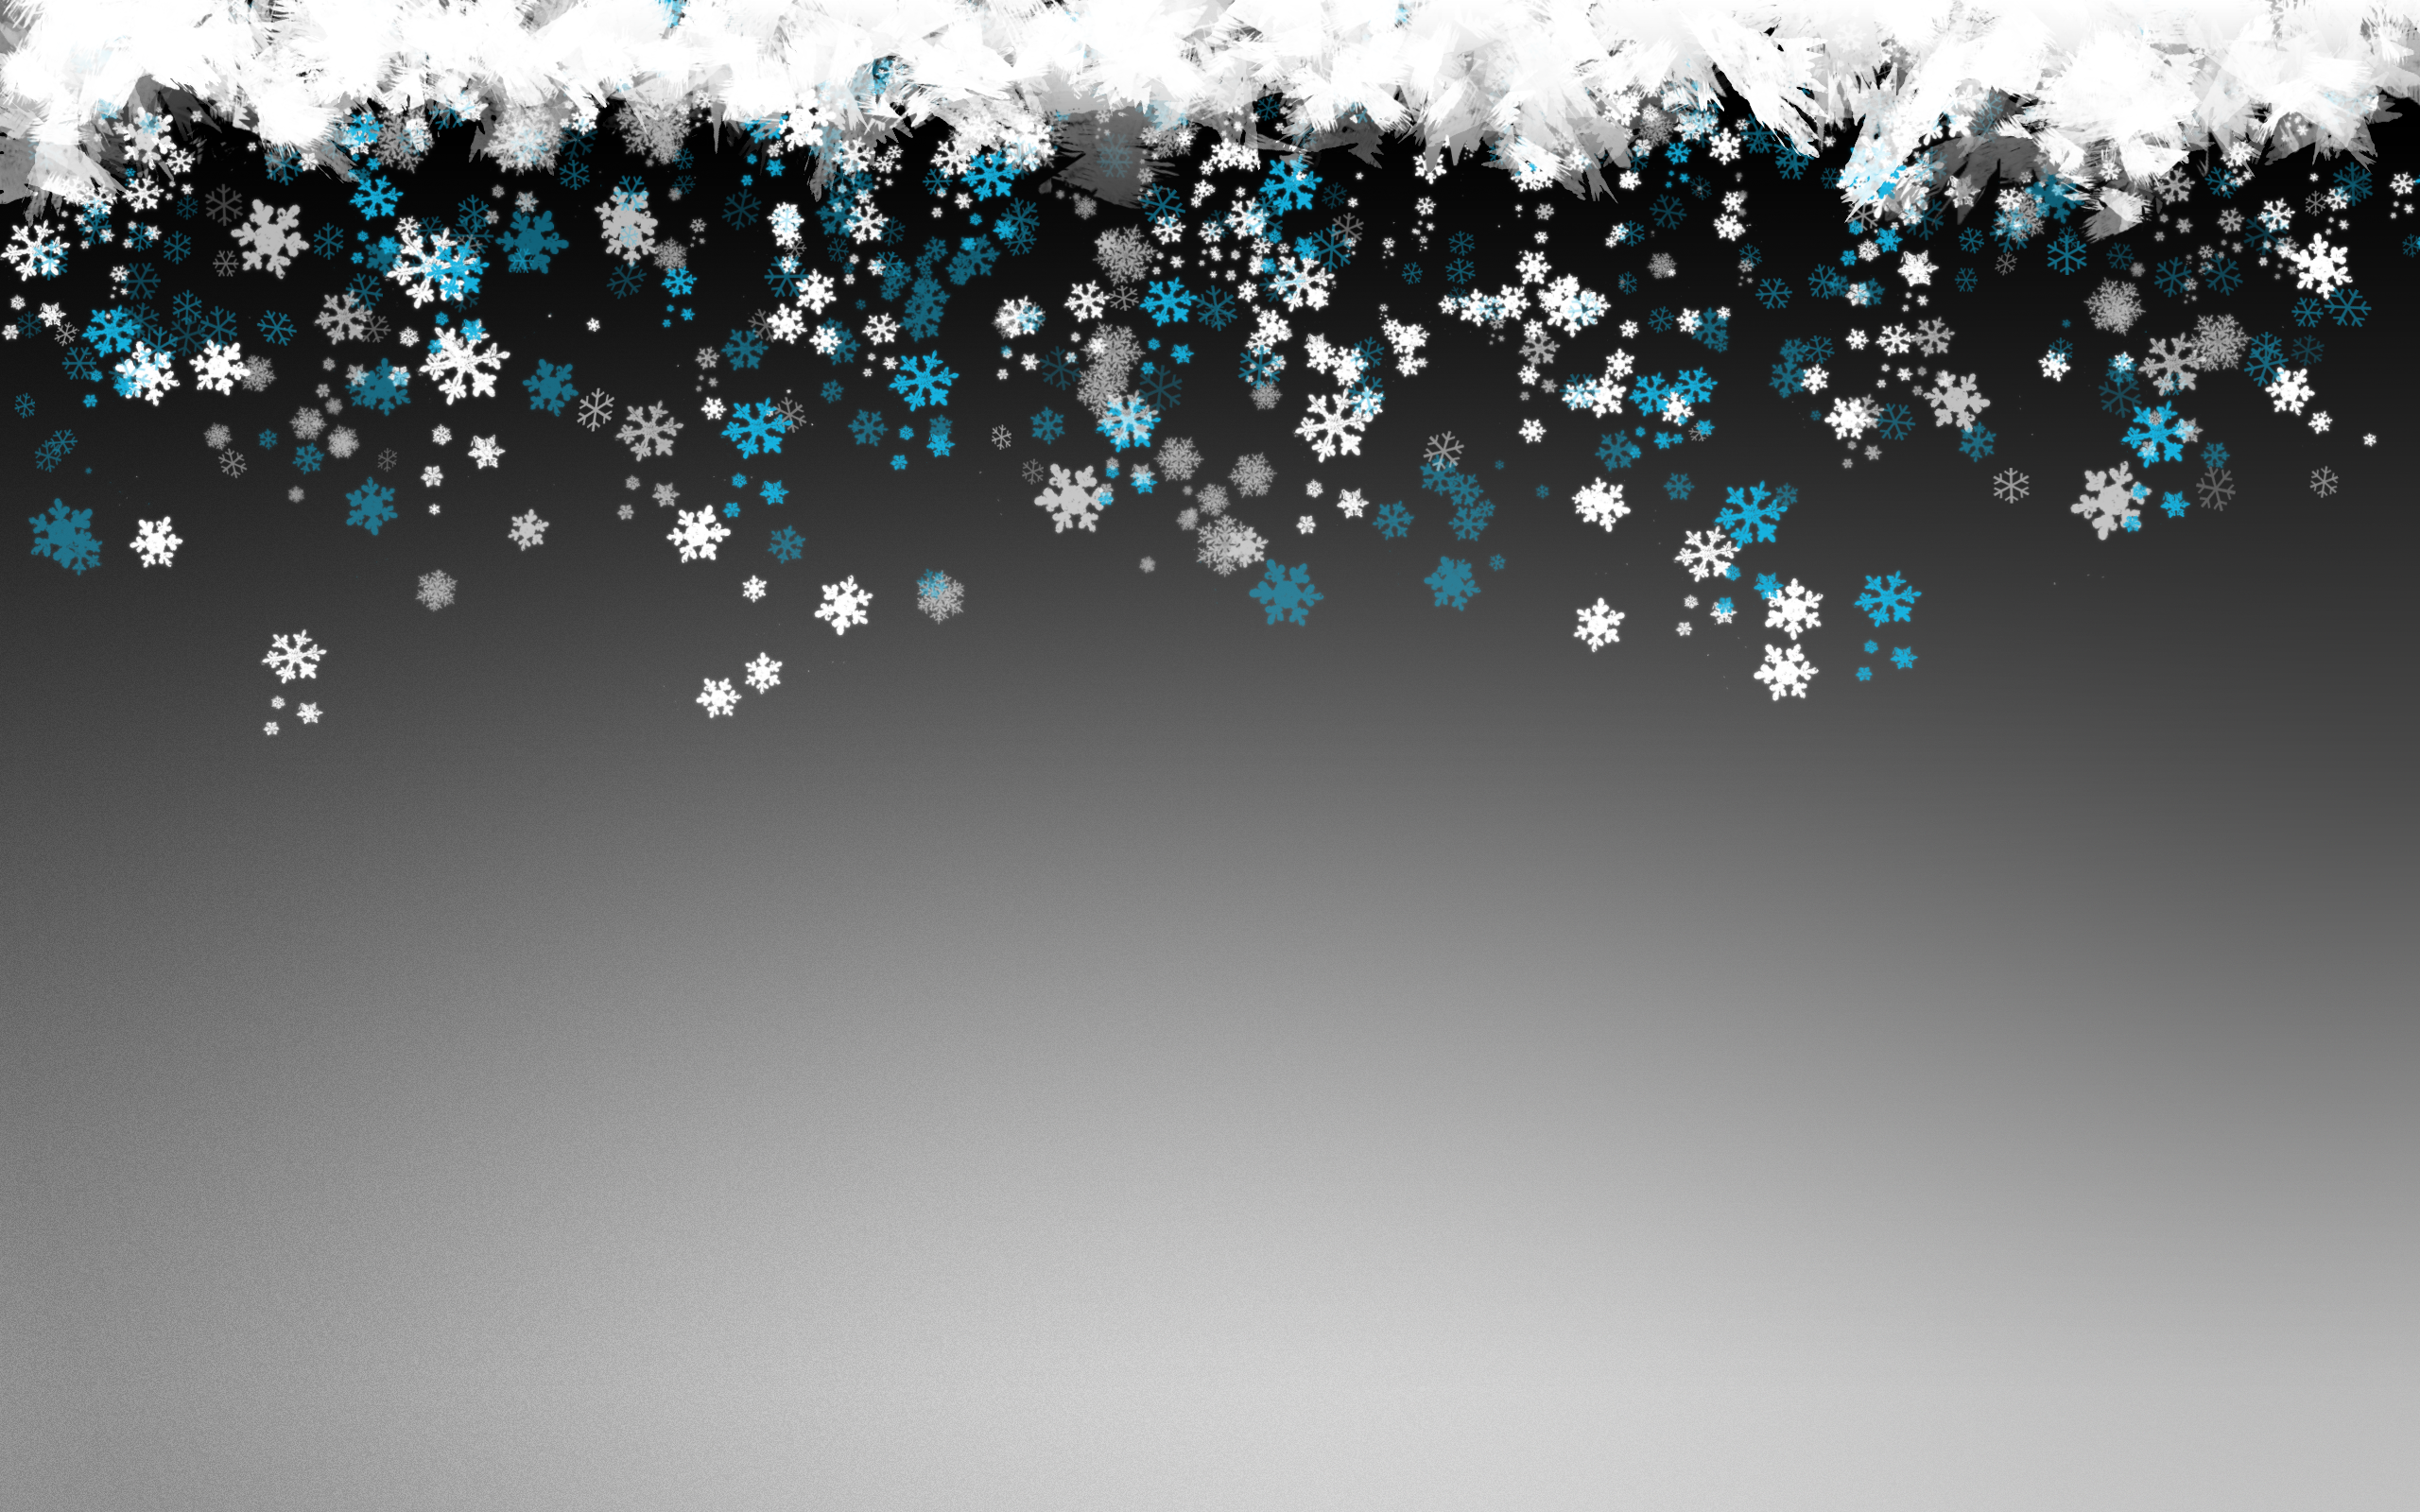 Snowflake Wallpaper High Resolution - New Years Powerpoint Background - HD Wallpaper 